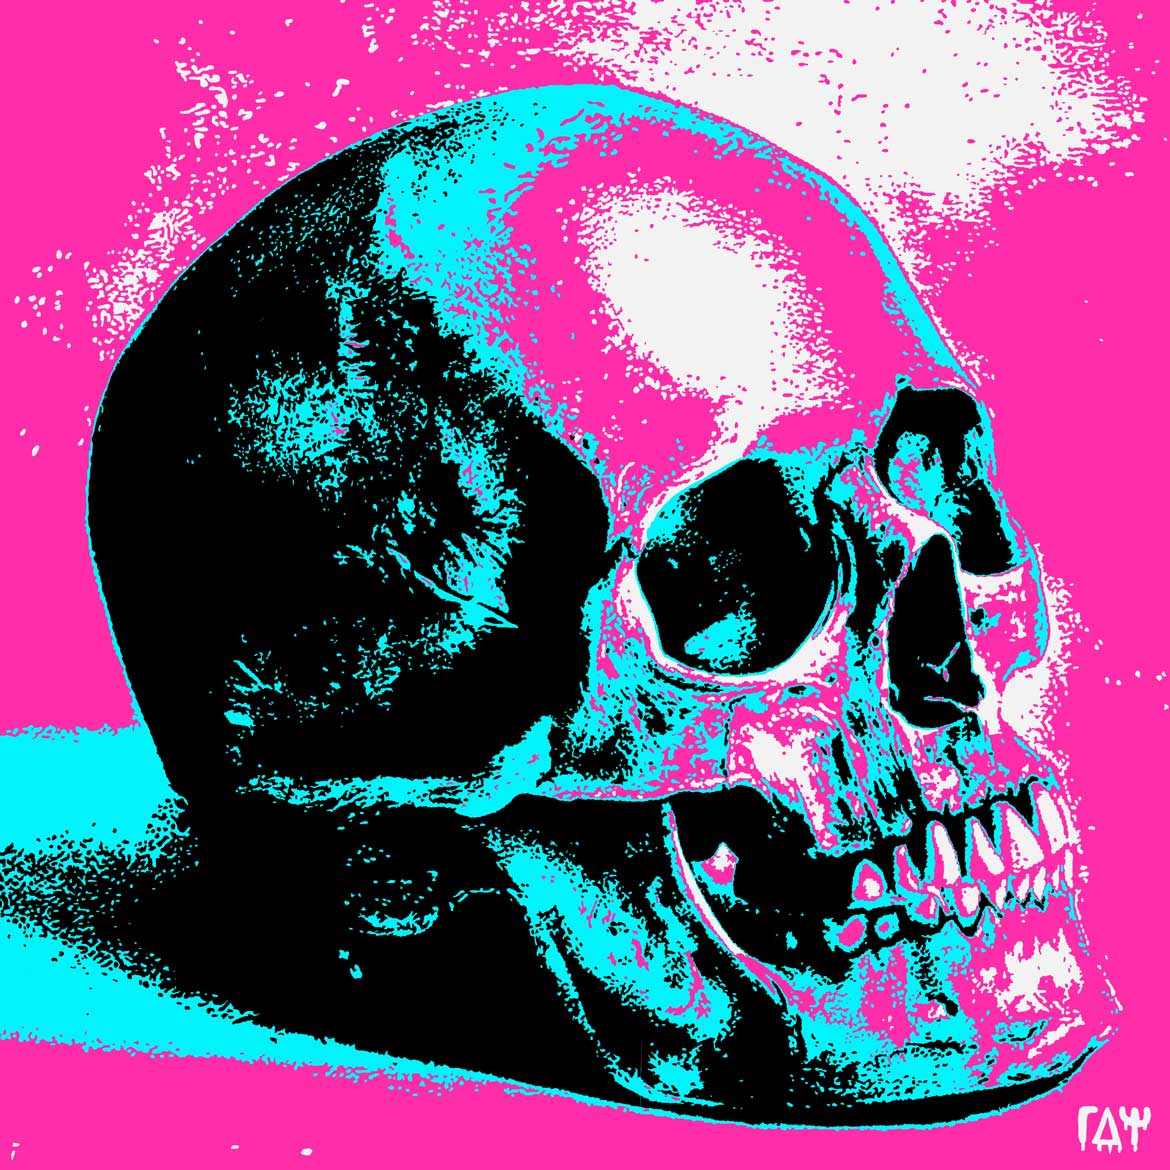 DAVID BOWIE SKULL ON PINK